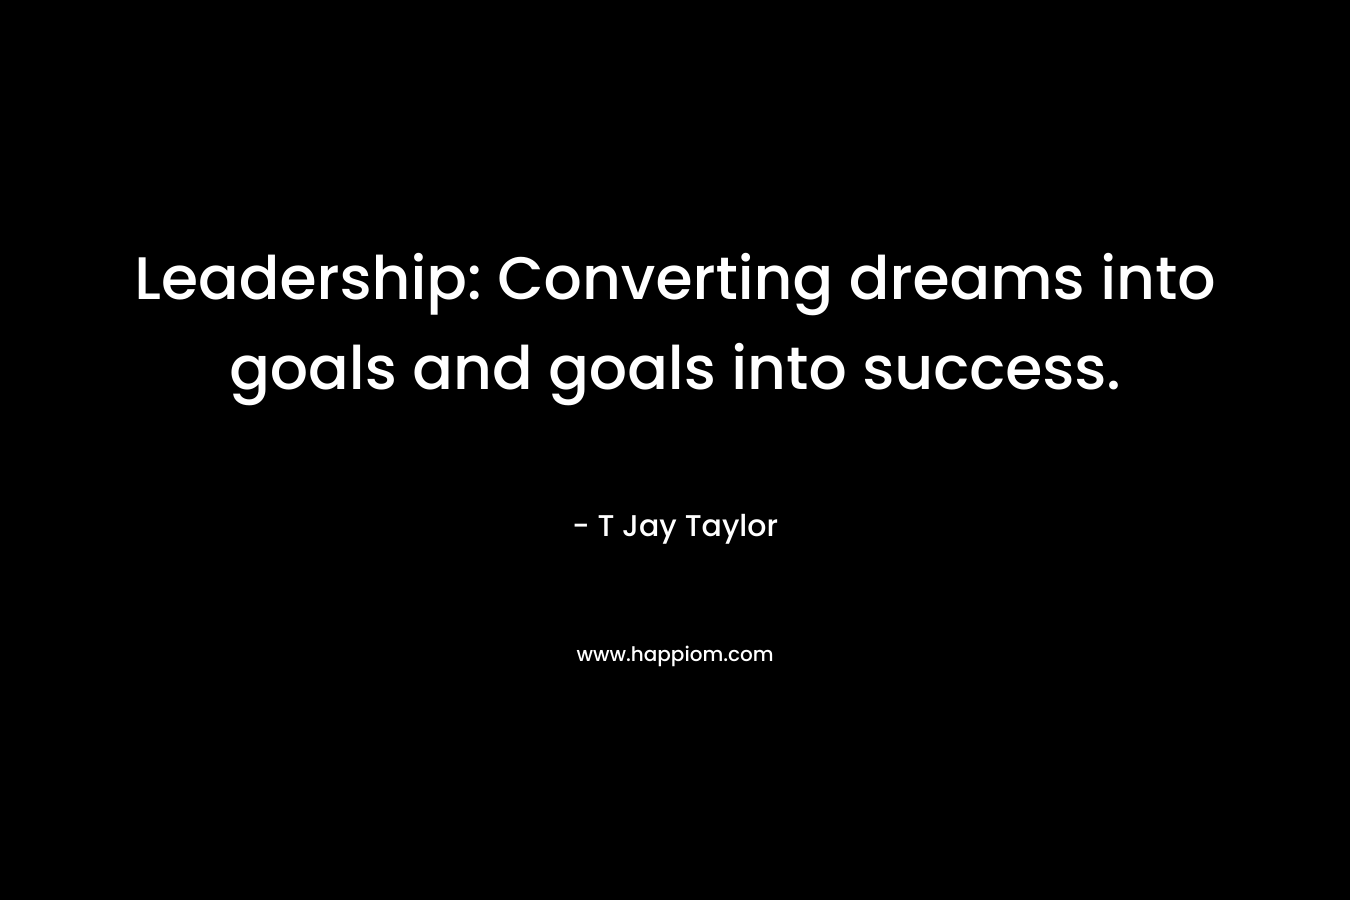 Leadership: Converting dreams into goals and goals into success. – T Jay Taylor